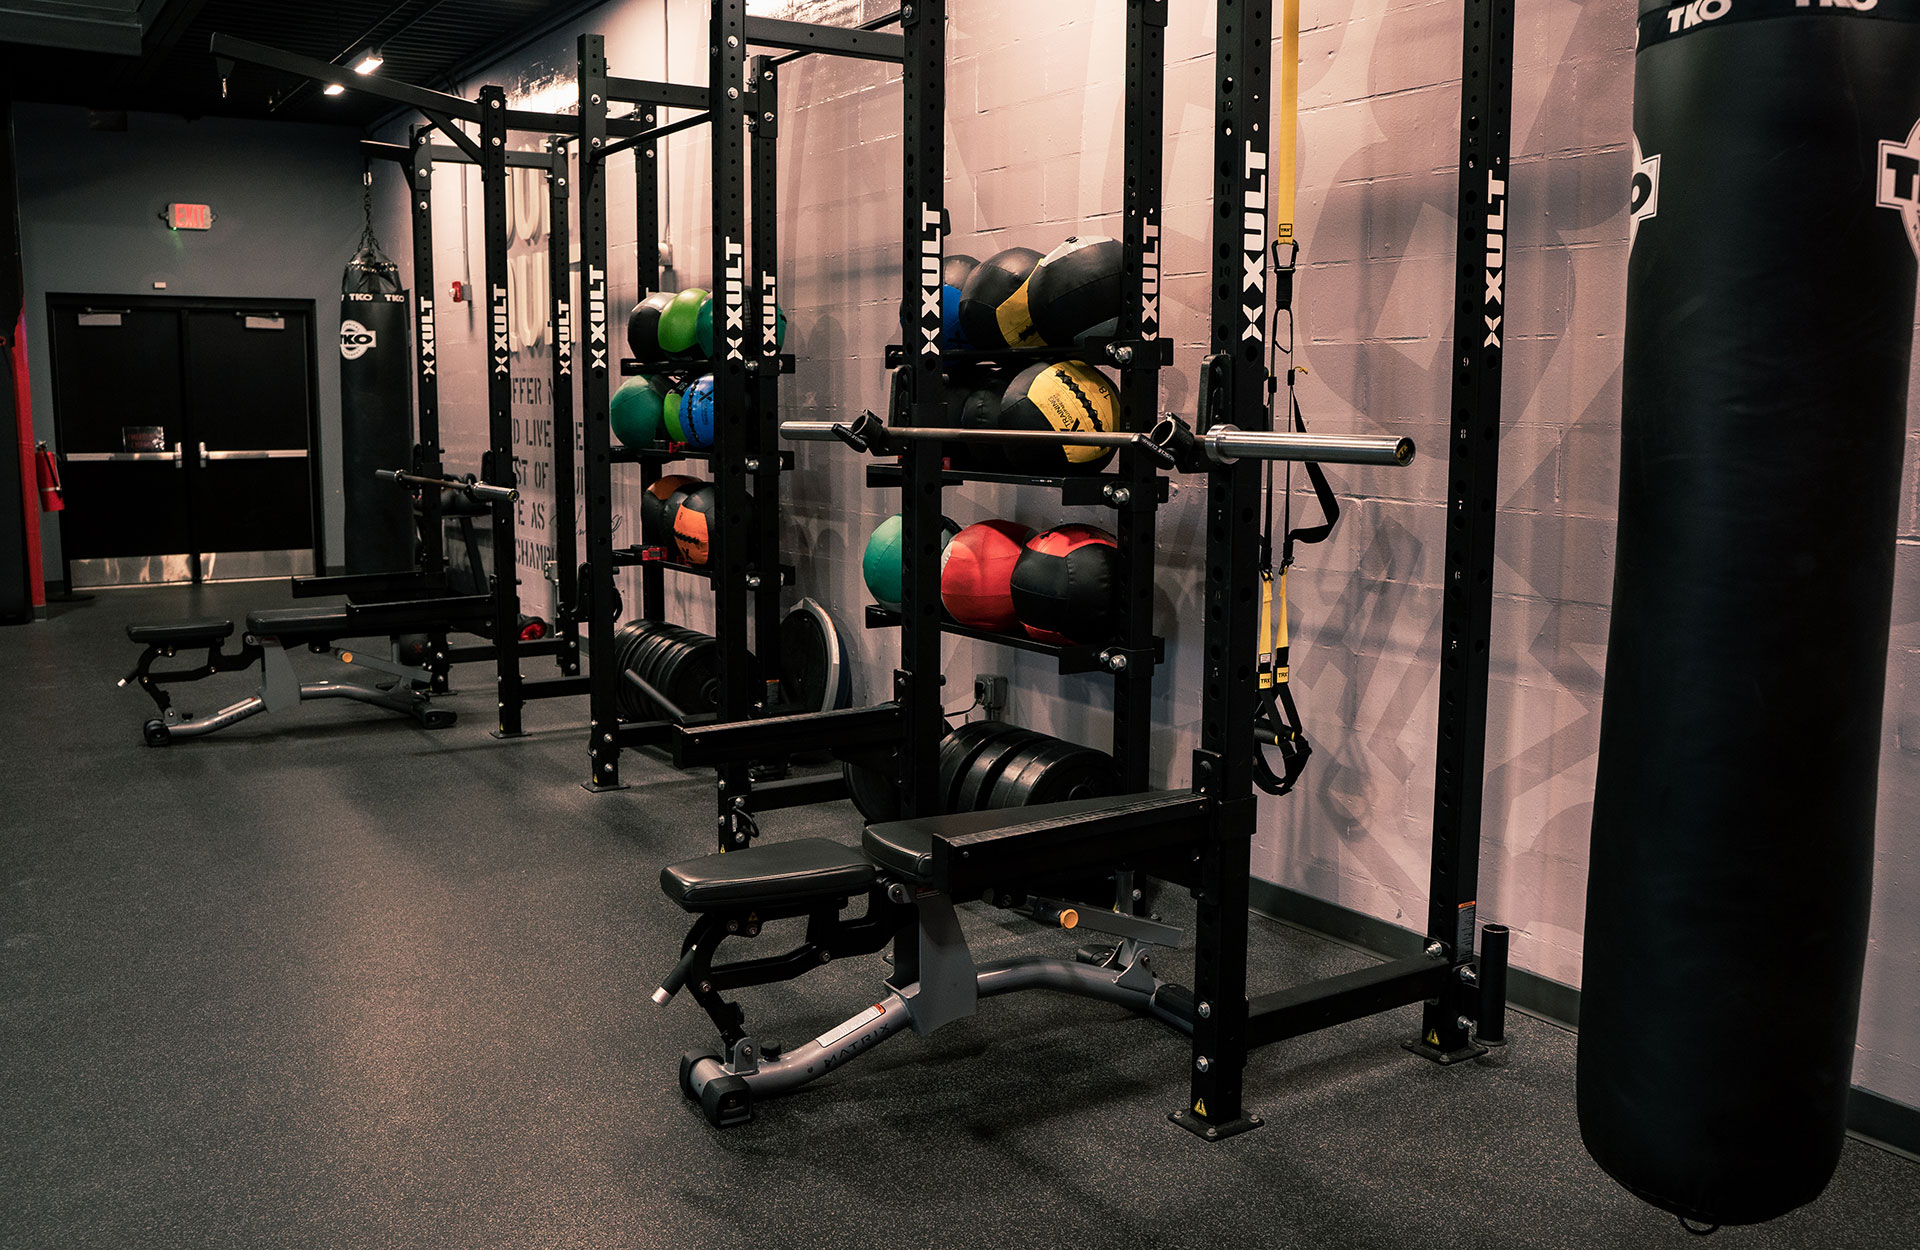 Bench press and squat rack machines at the 24/7 fitness center